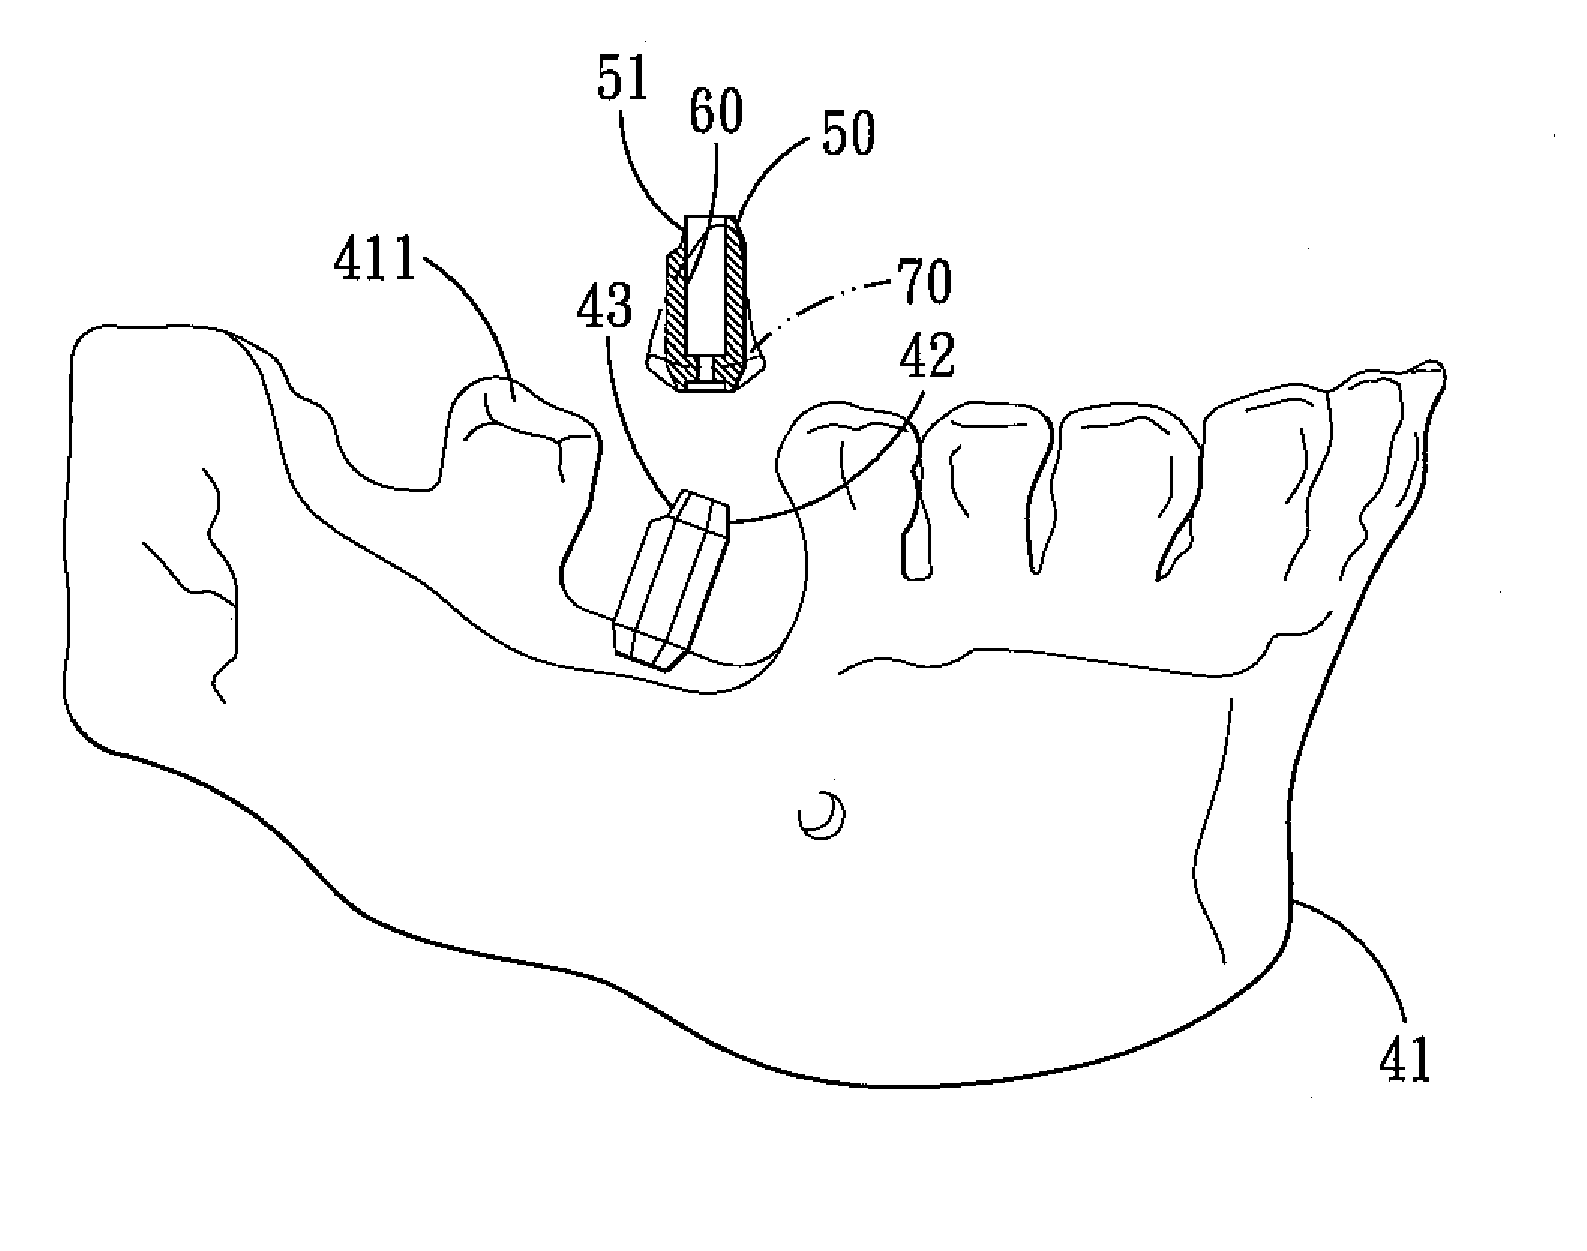 Method for designing an abutment